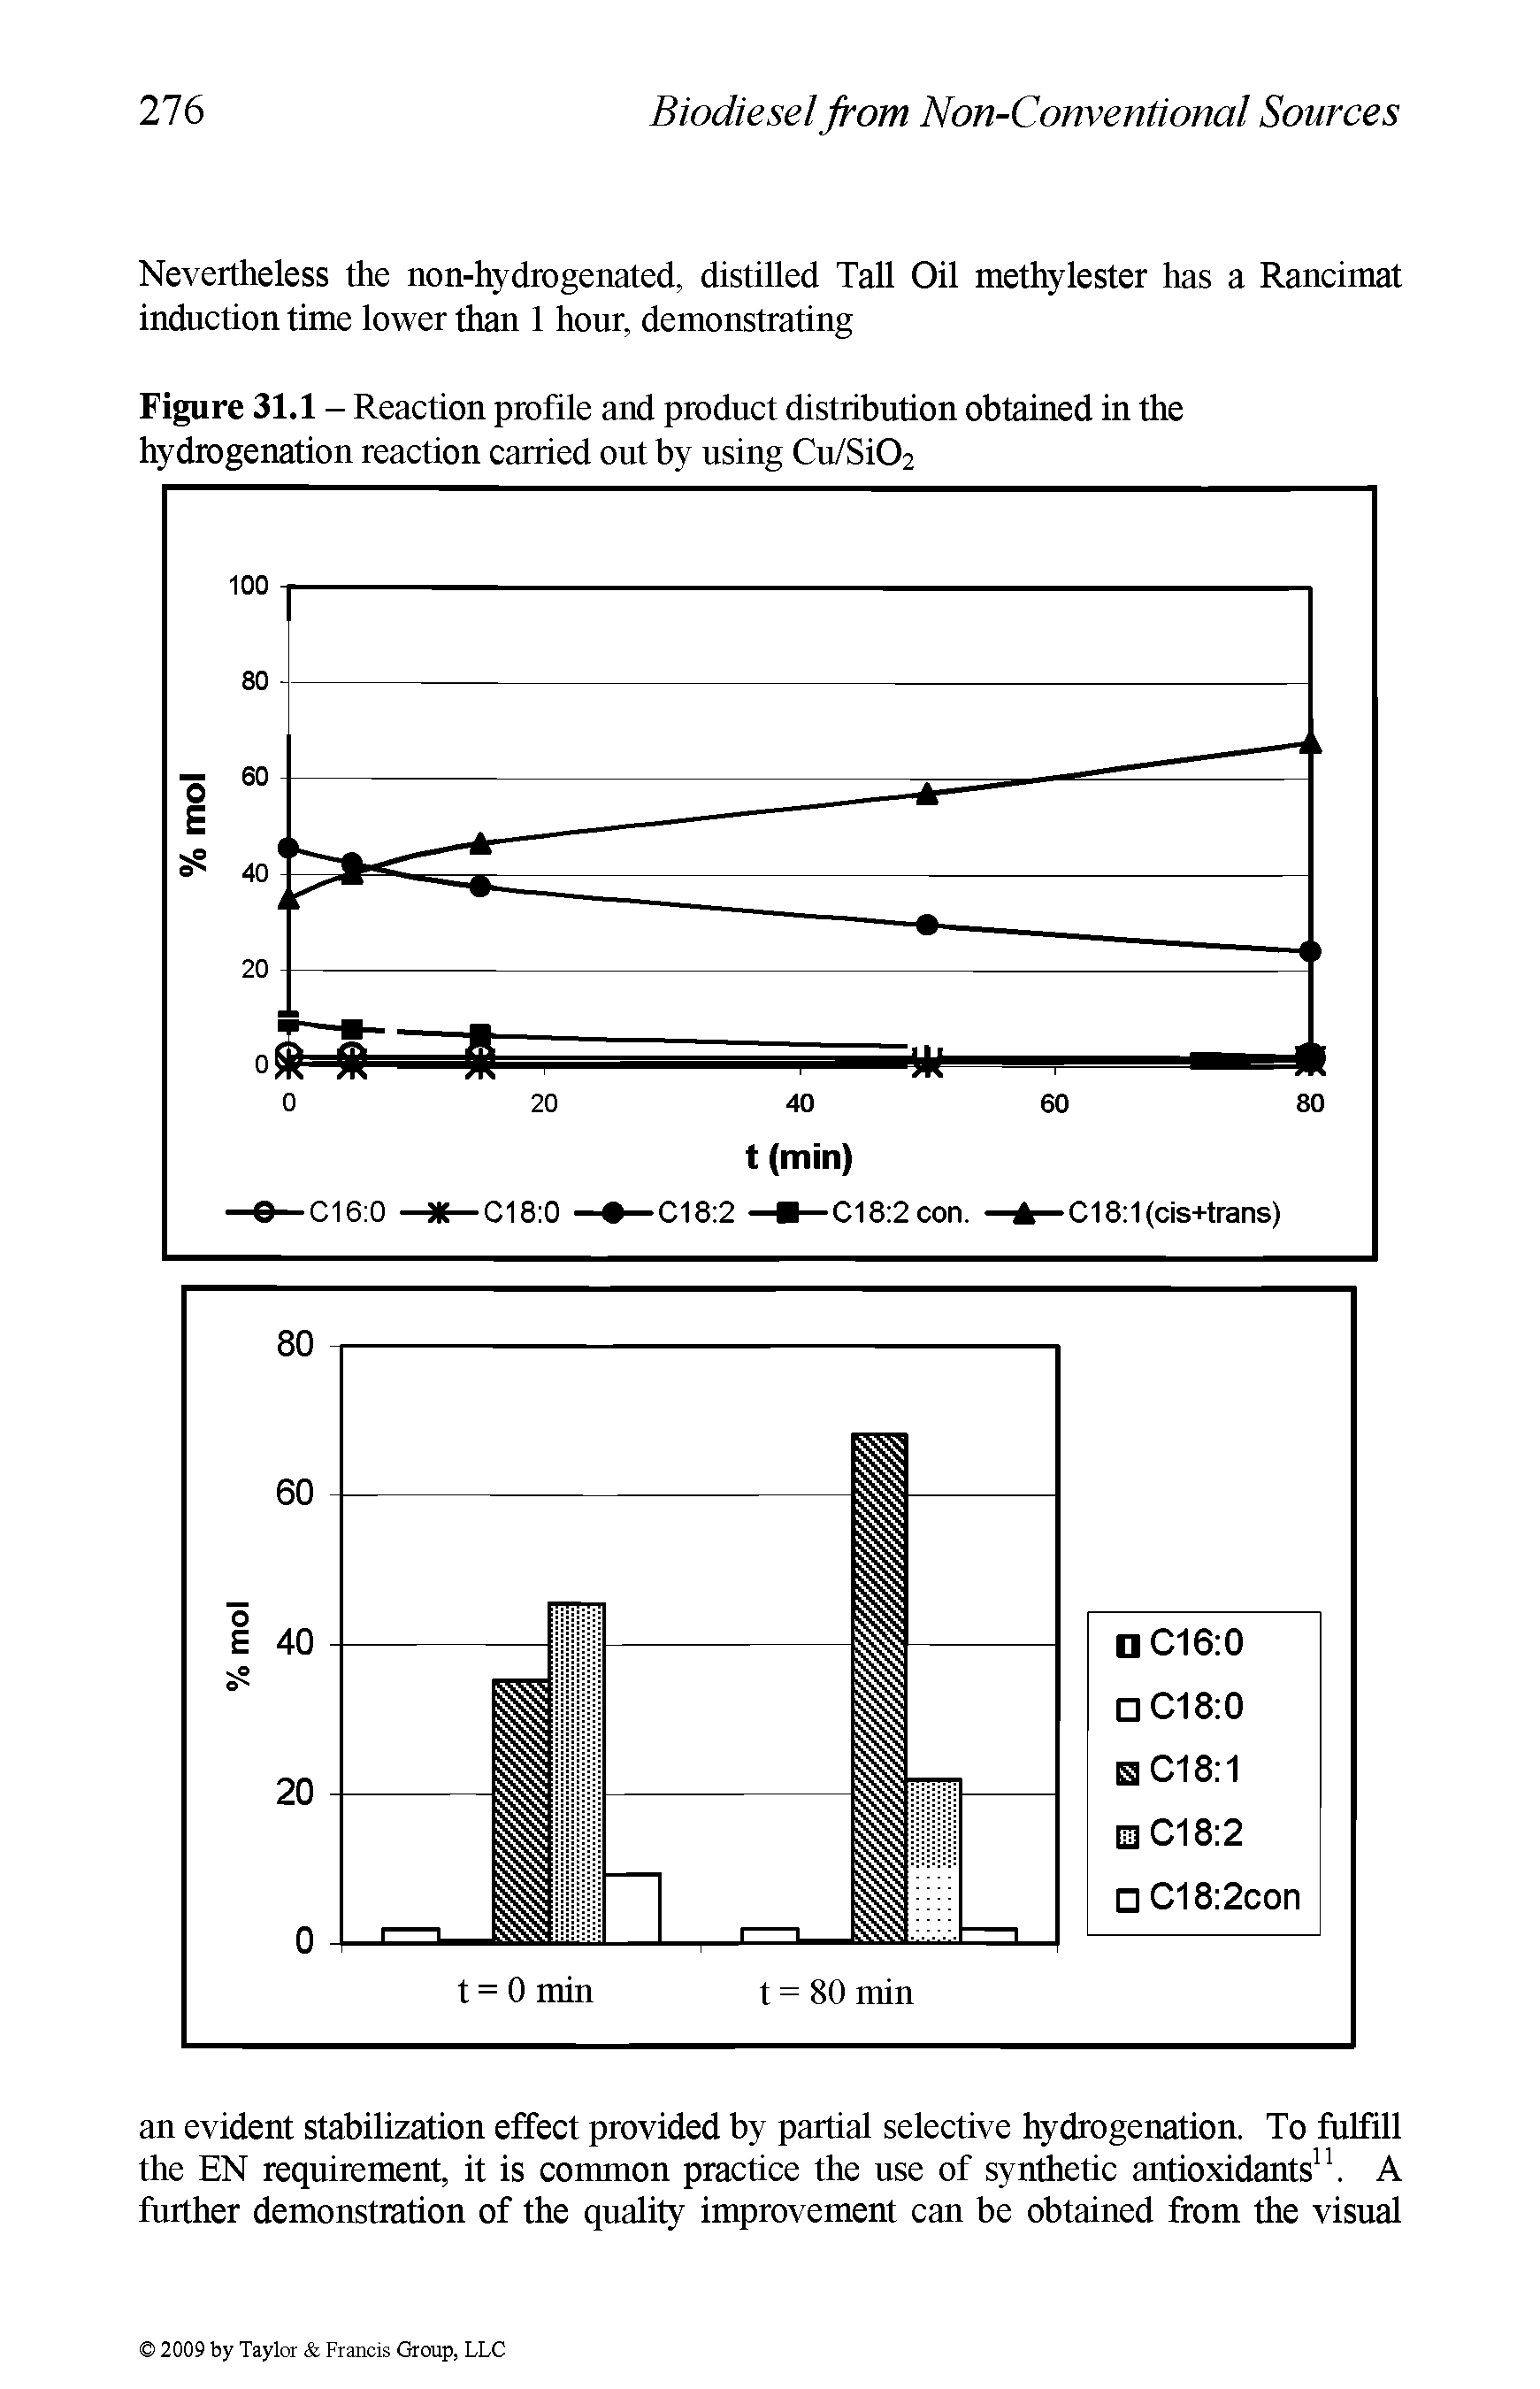 Figure 31.1 - Reaction profile and product distribution obtained in the hydrogenation reaction carried out by using Cu/Si02...